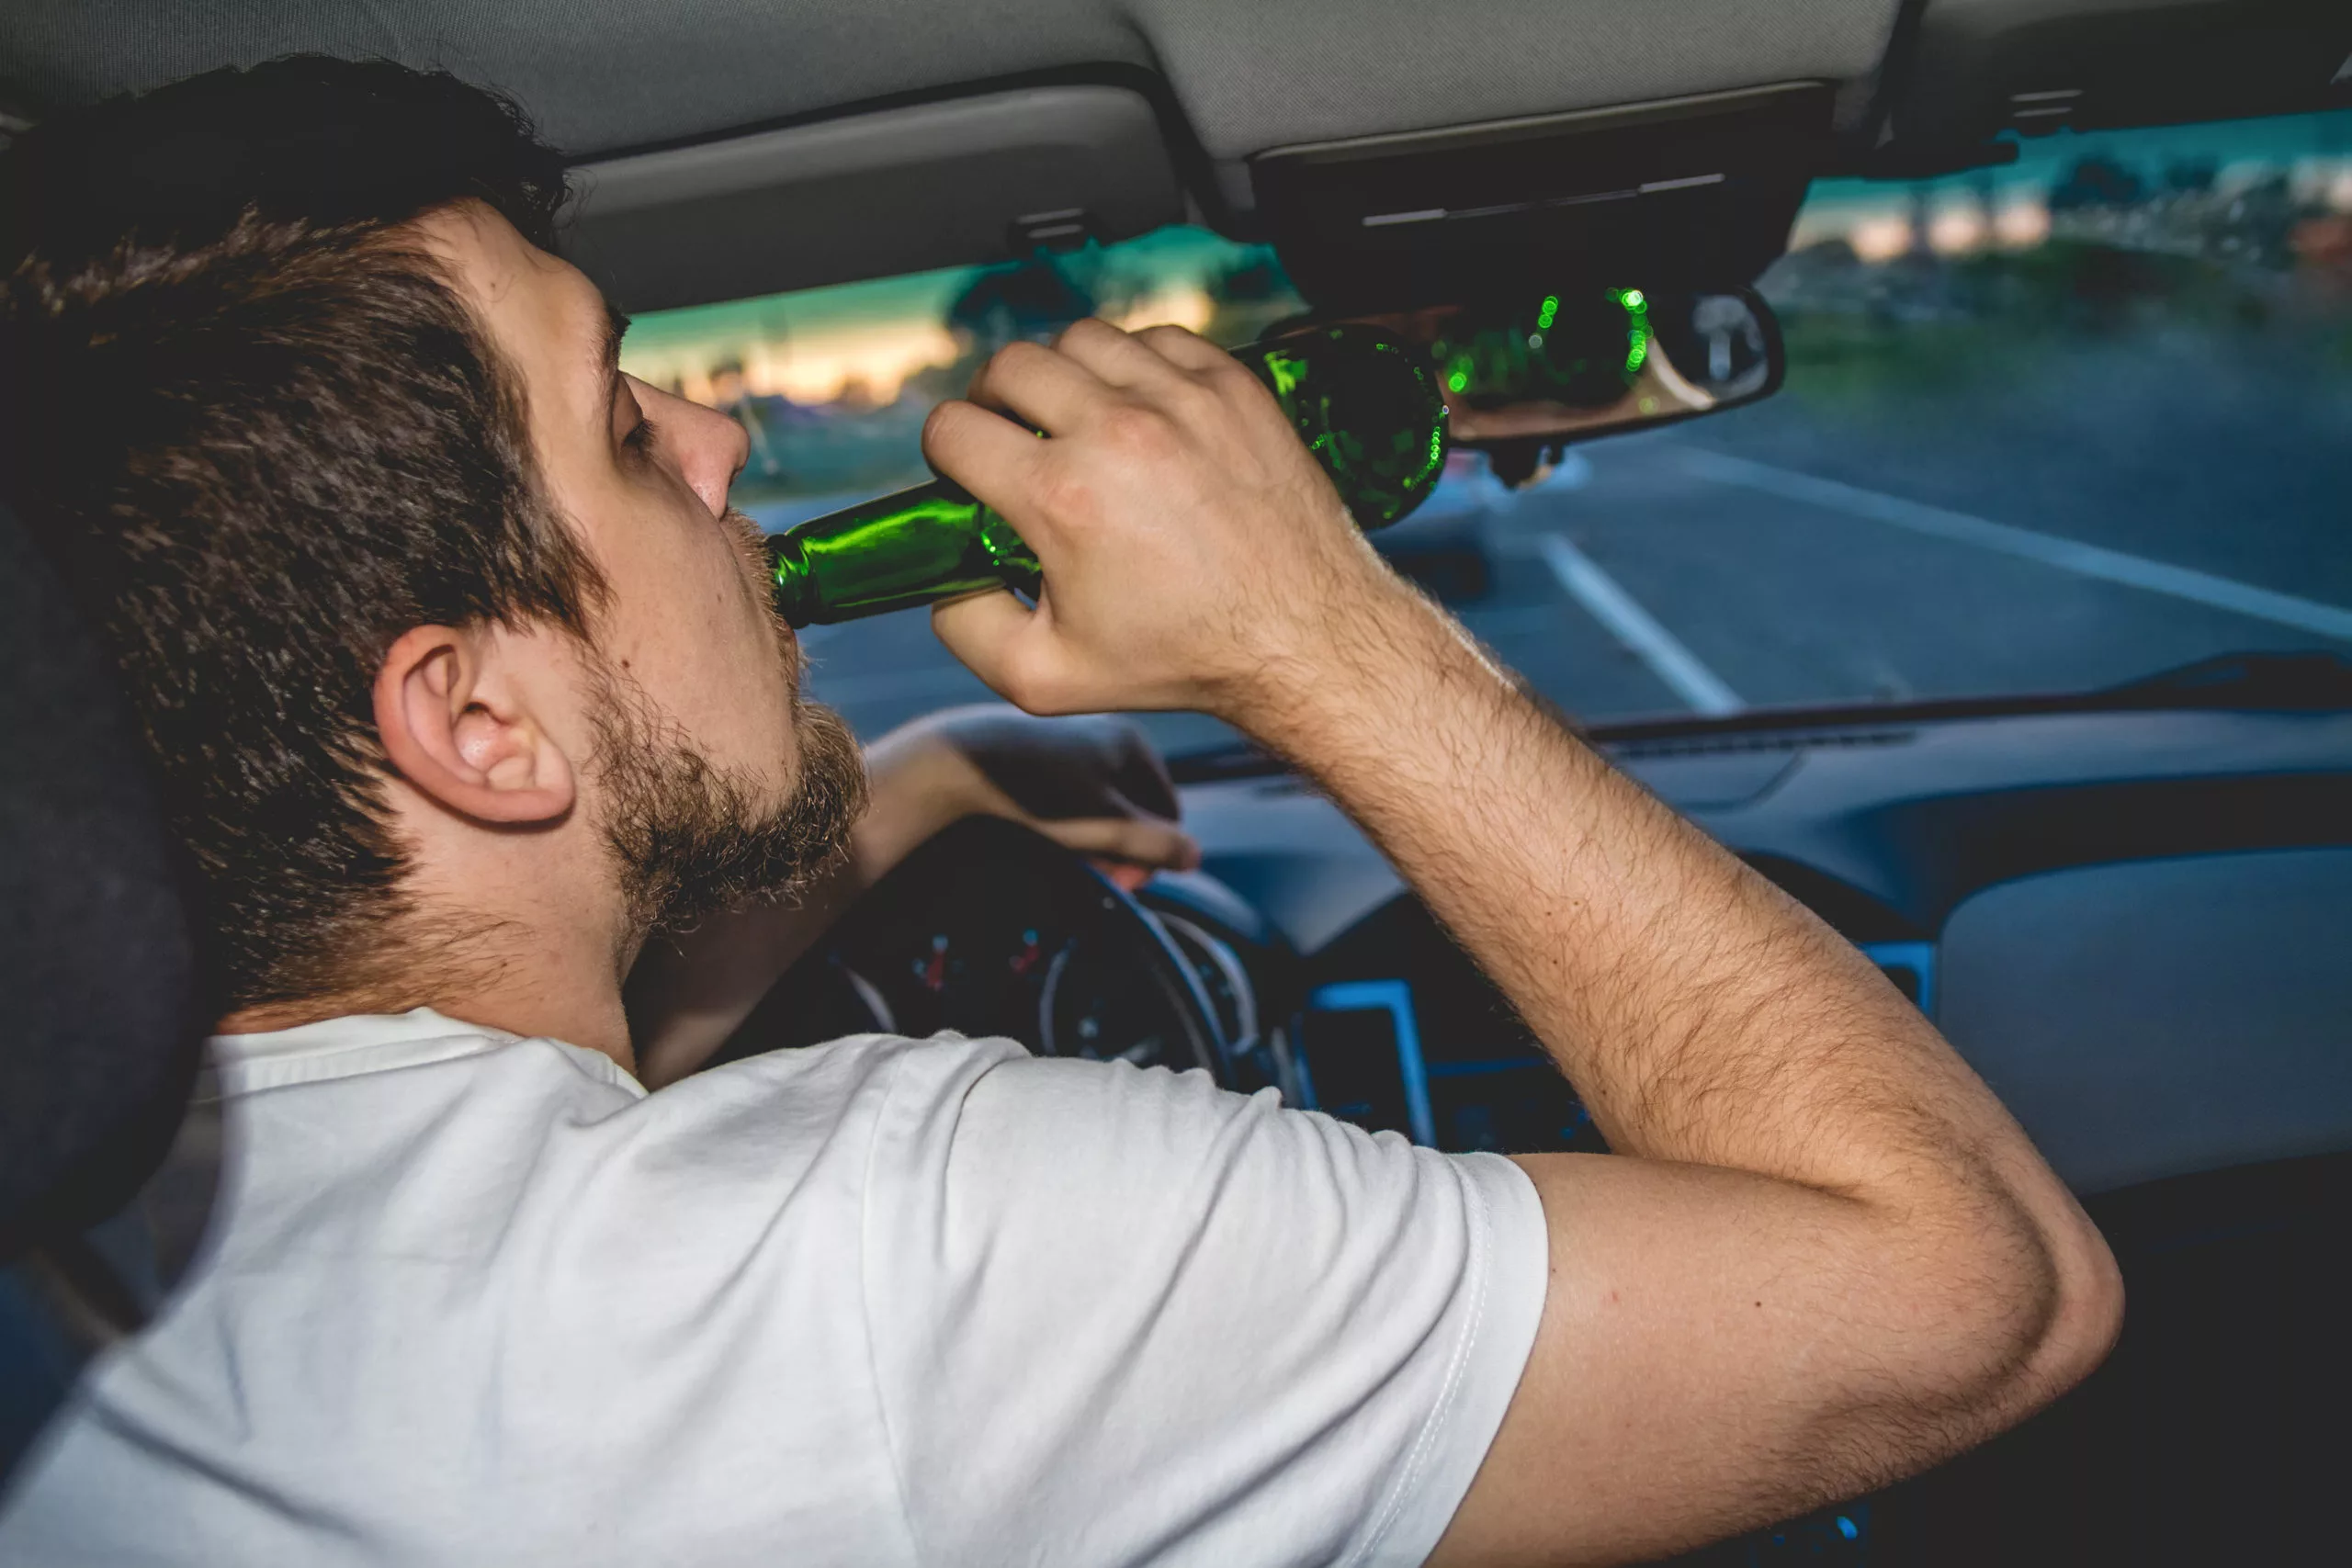 steps to take after a DUI car accident in Washington